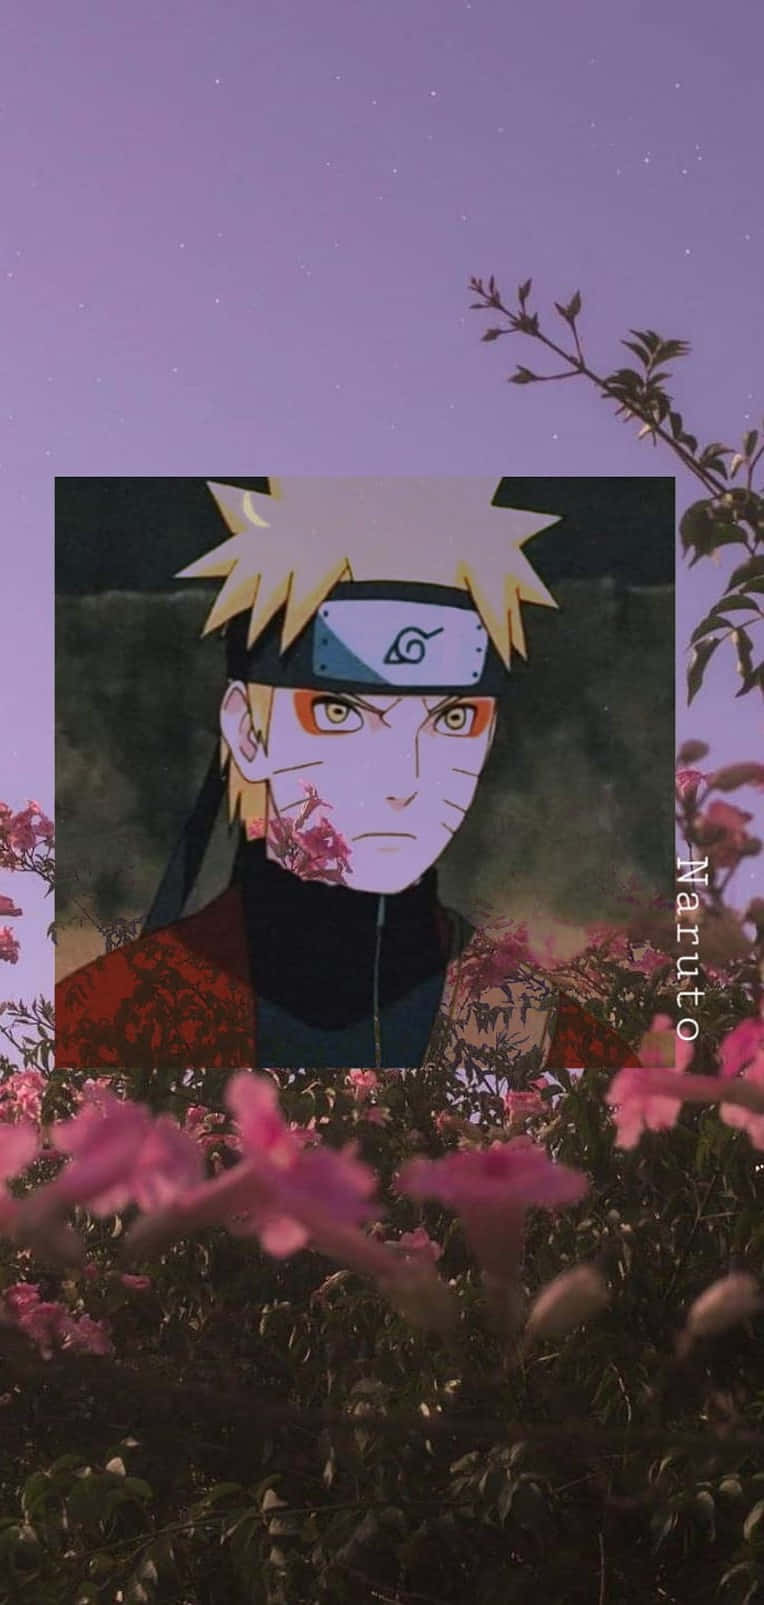 Download Sporting An Aesthetic Naruto Phone For The Win! Wallpaper